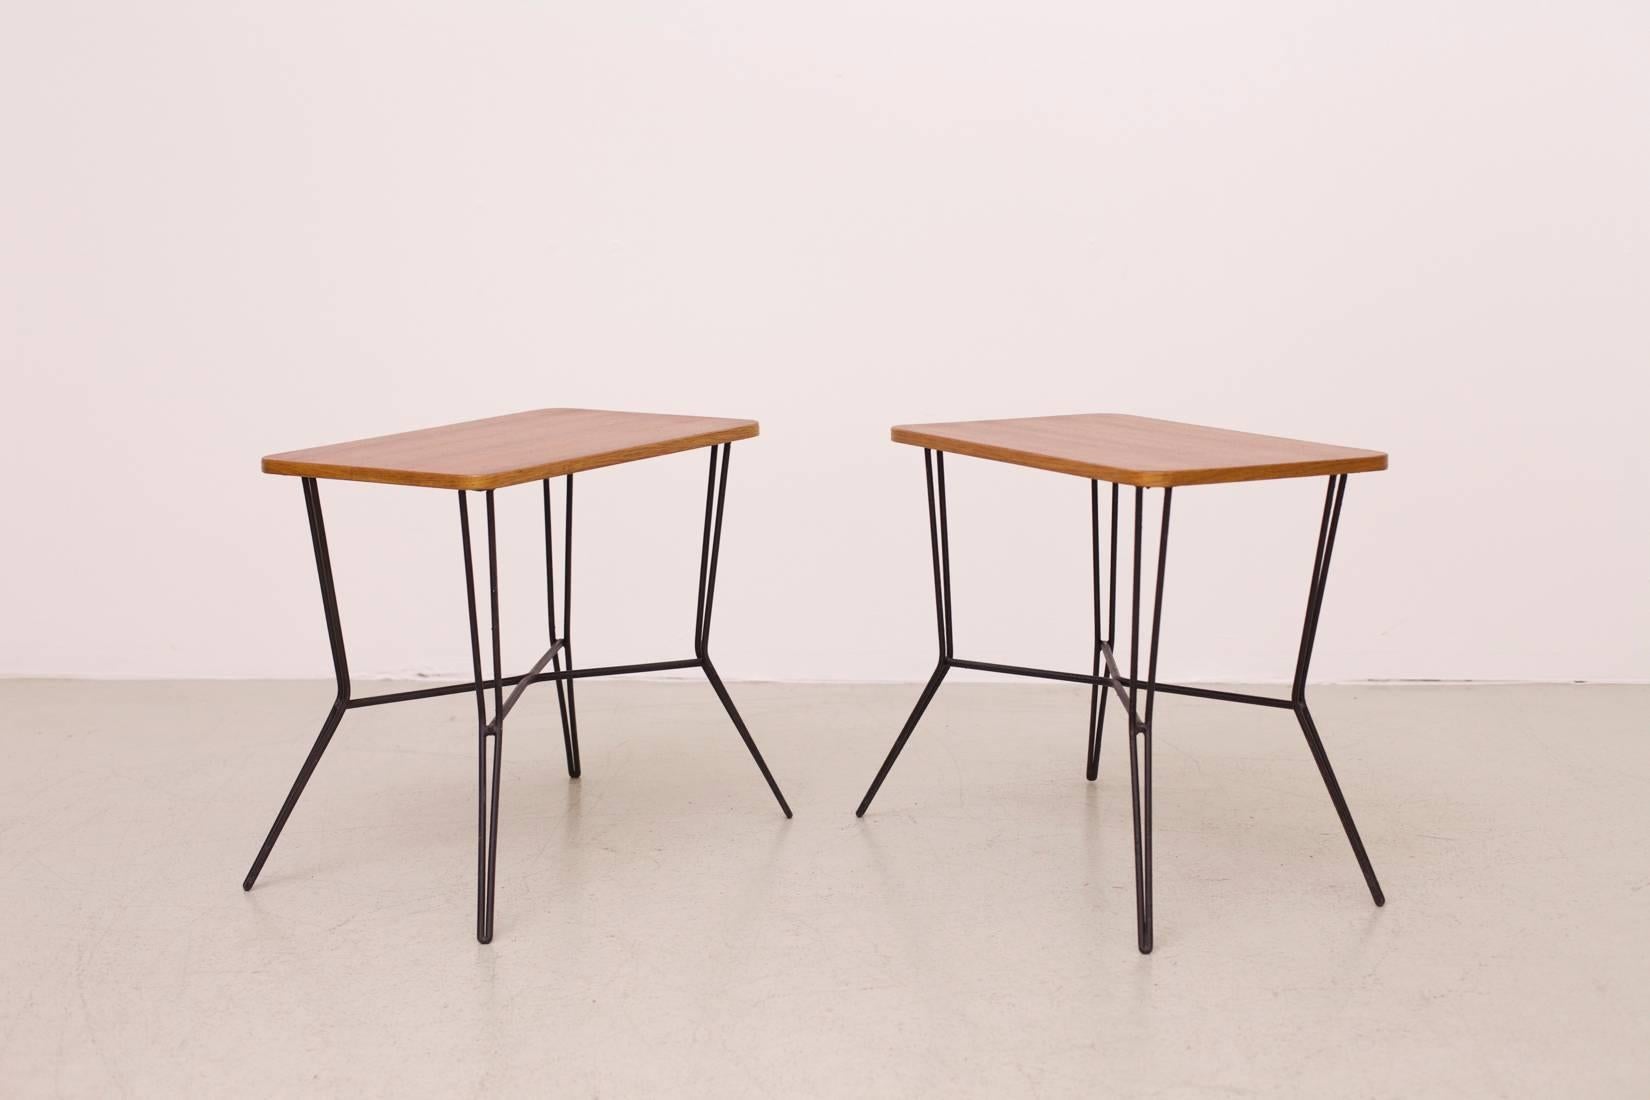 A set of two stunning french 50's coffee tables / side tables with wooden table tops on a black metal base in the manner of Jean Royère. They are in perfect vintage condition.